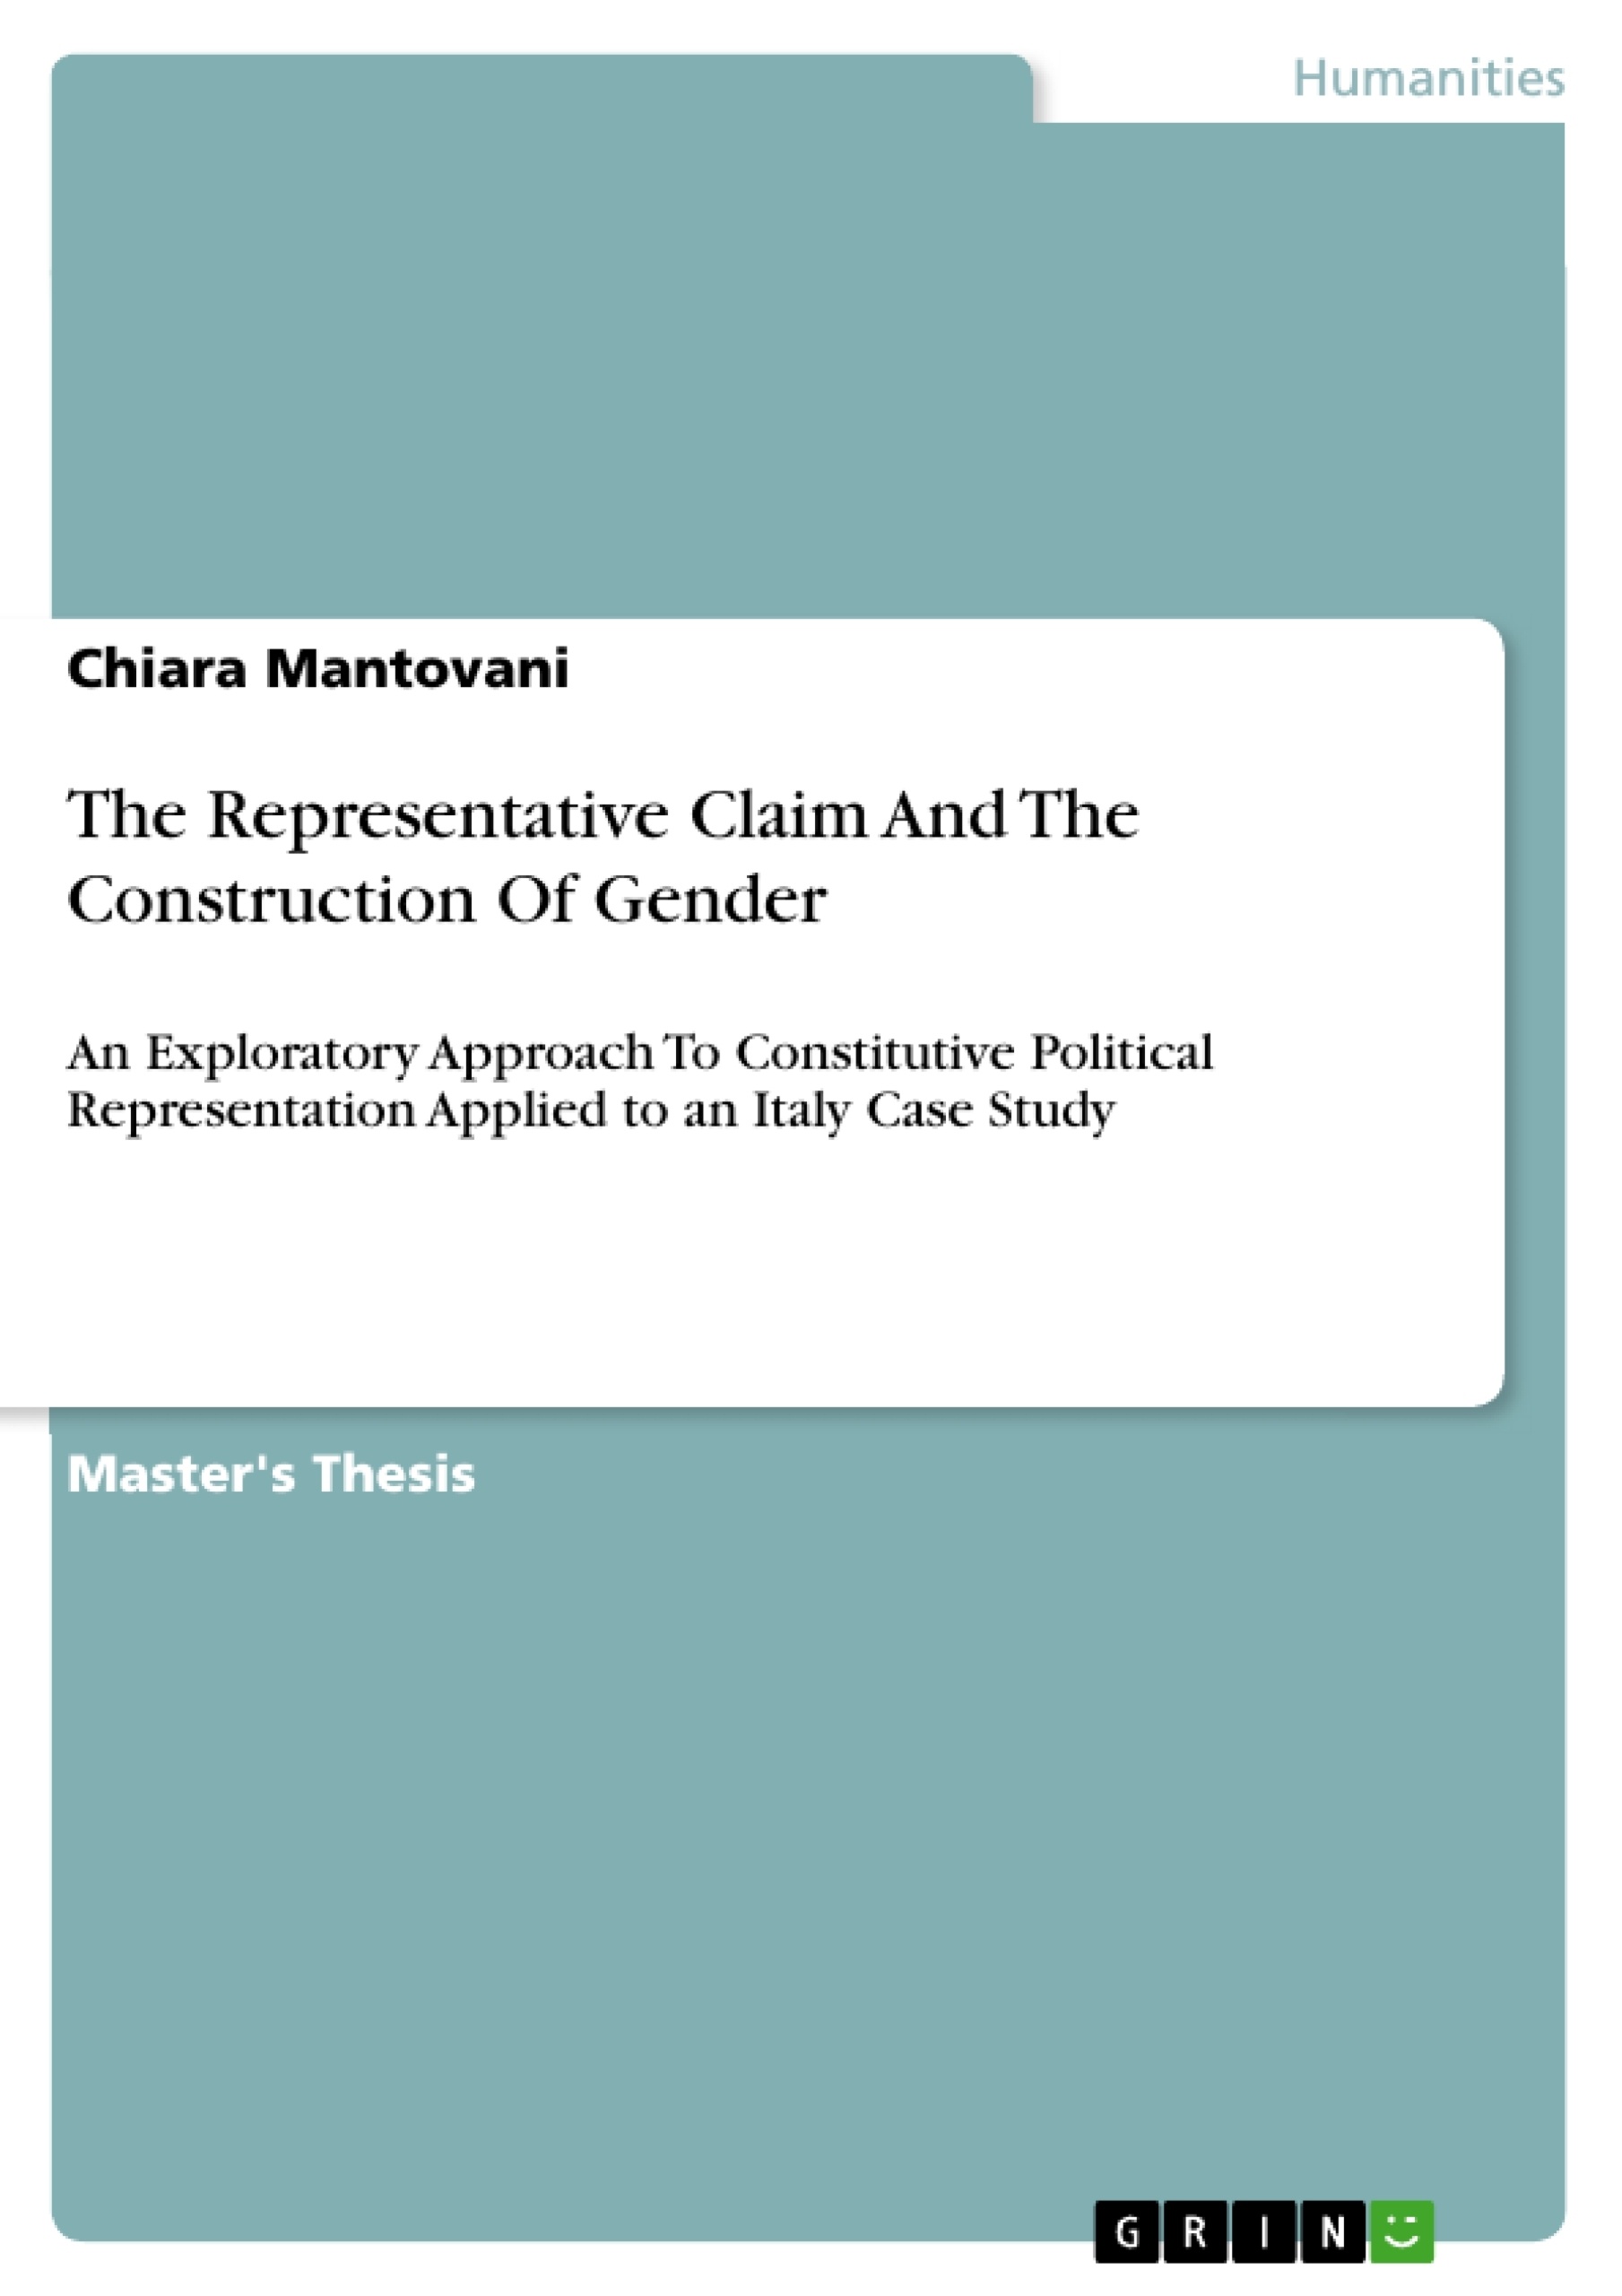 Título: The Representative Claim And The Construction Of Gender